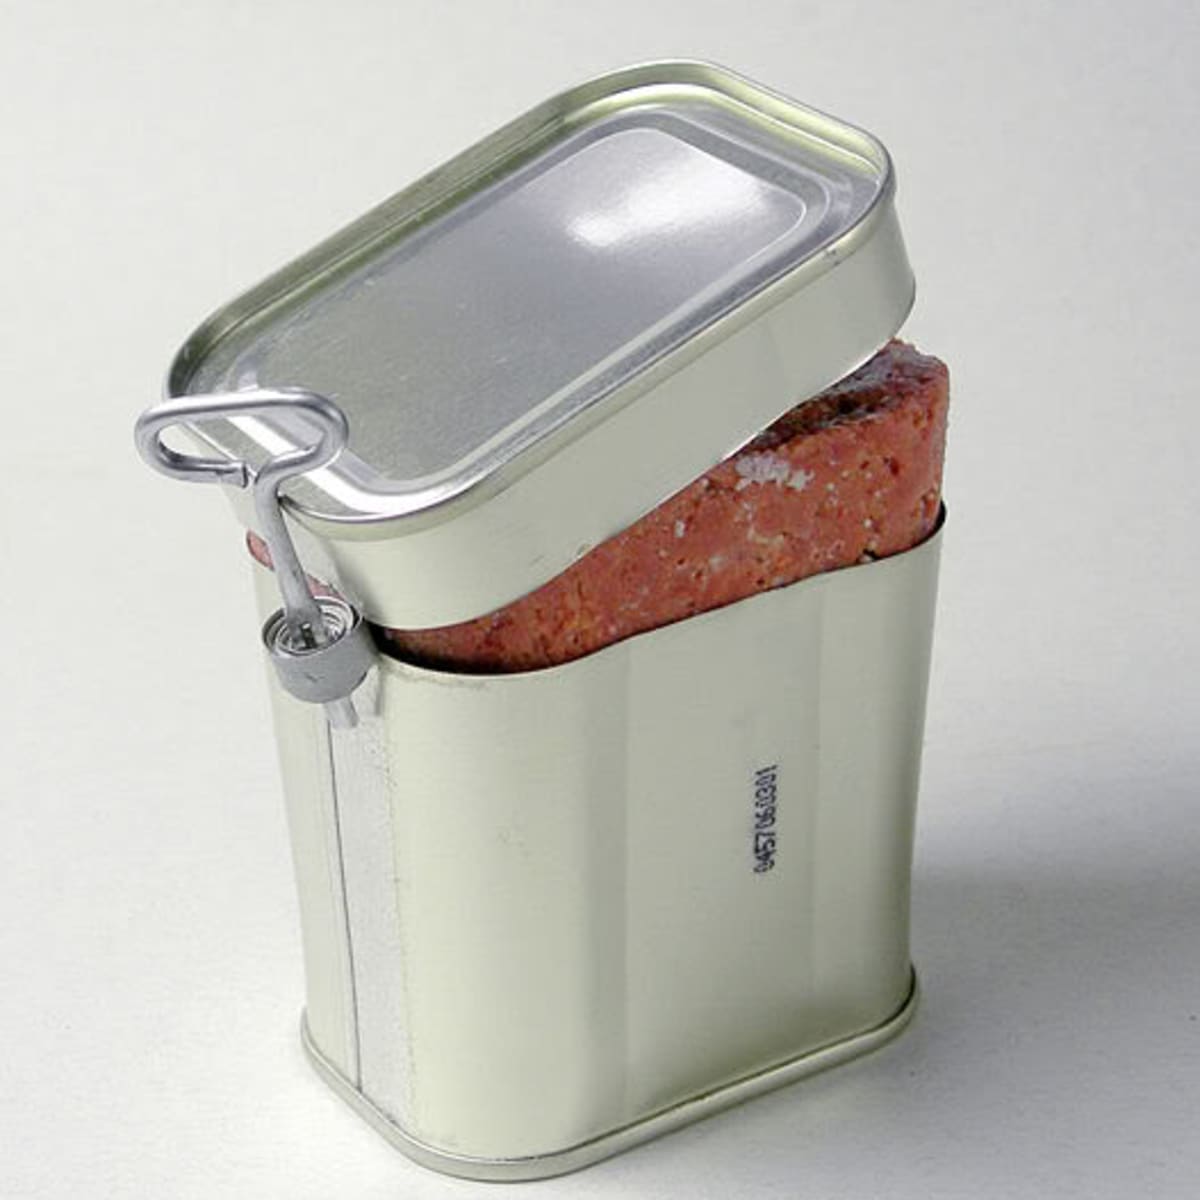 Who Makes the Best Plastic Storage Containers? - Delishably